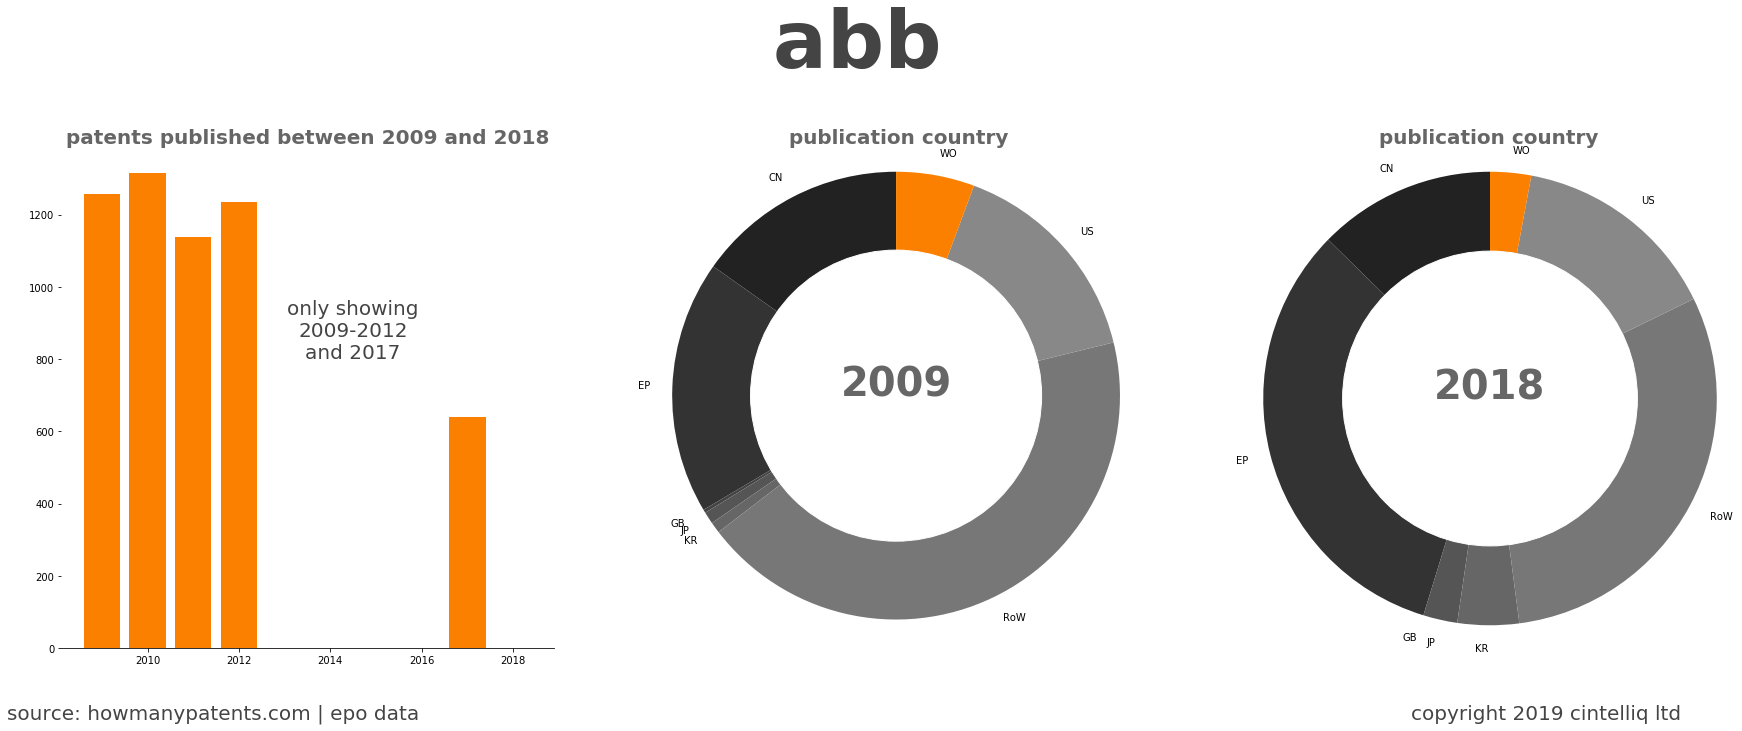 summary of patents for Abb 